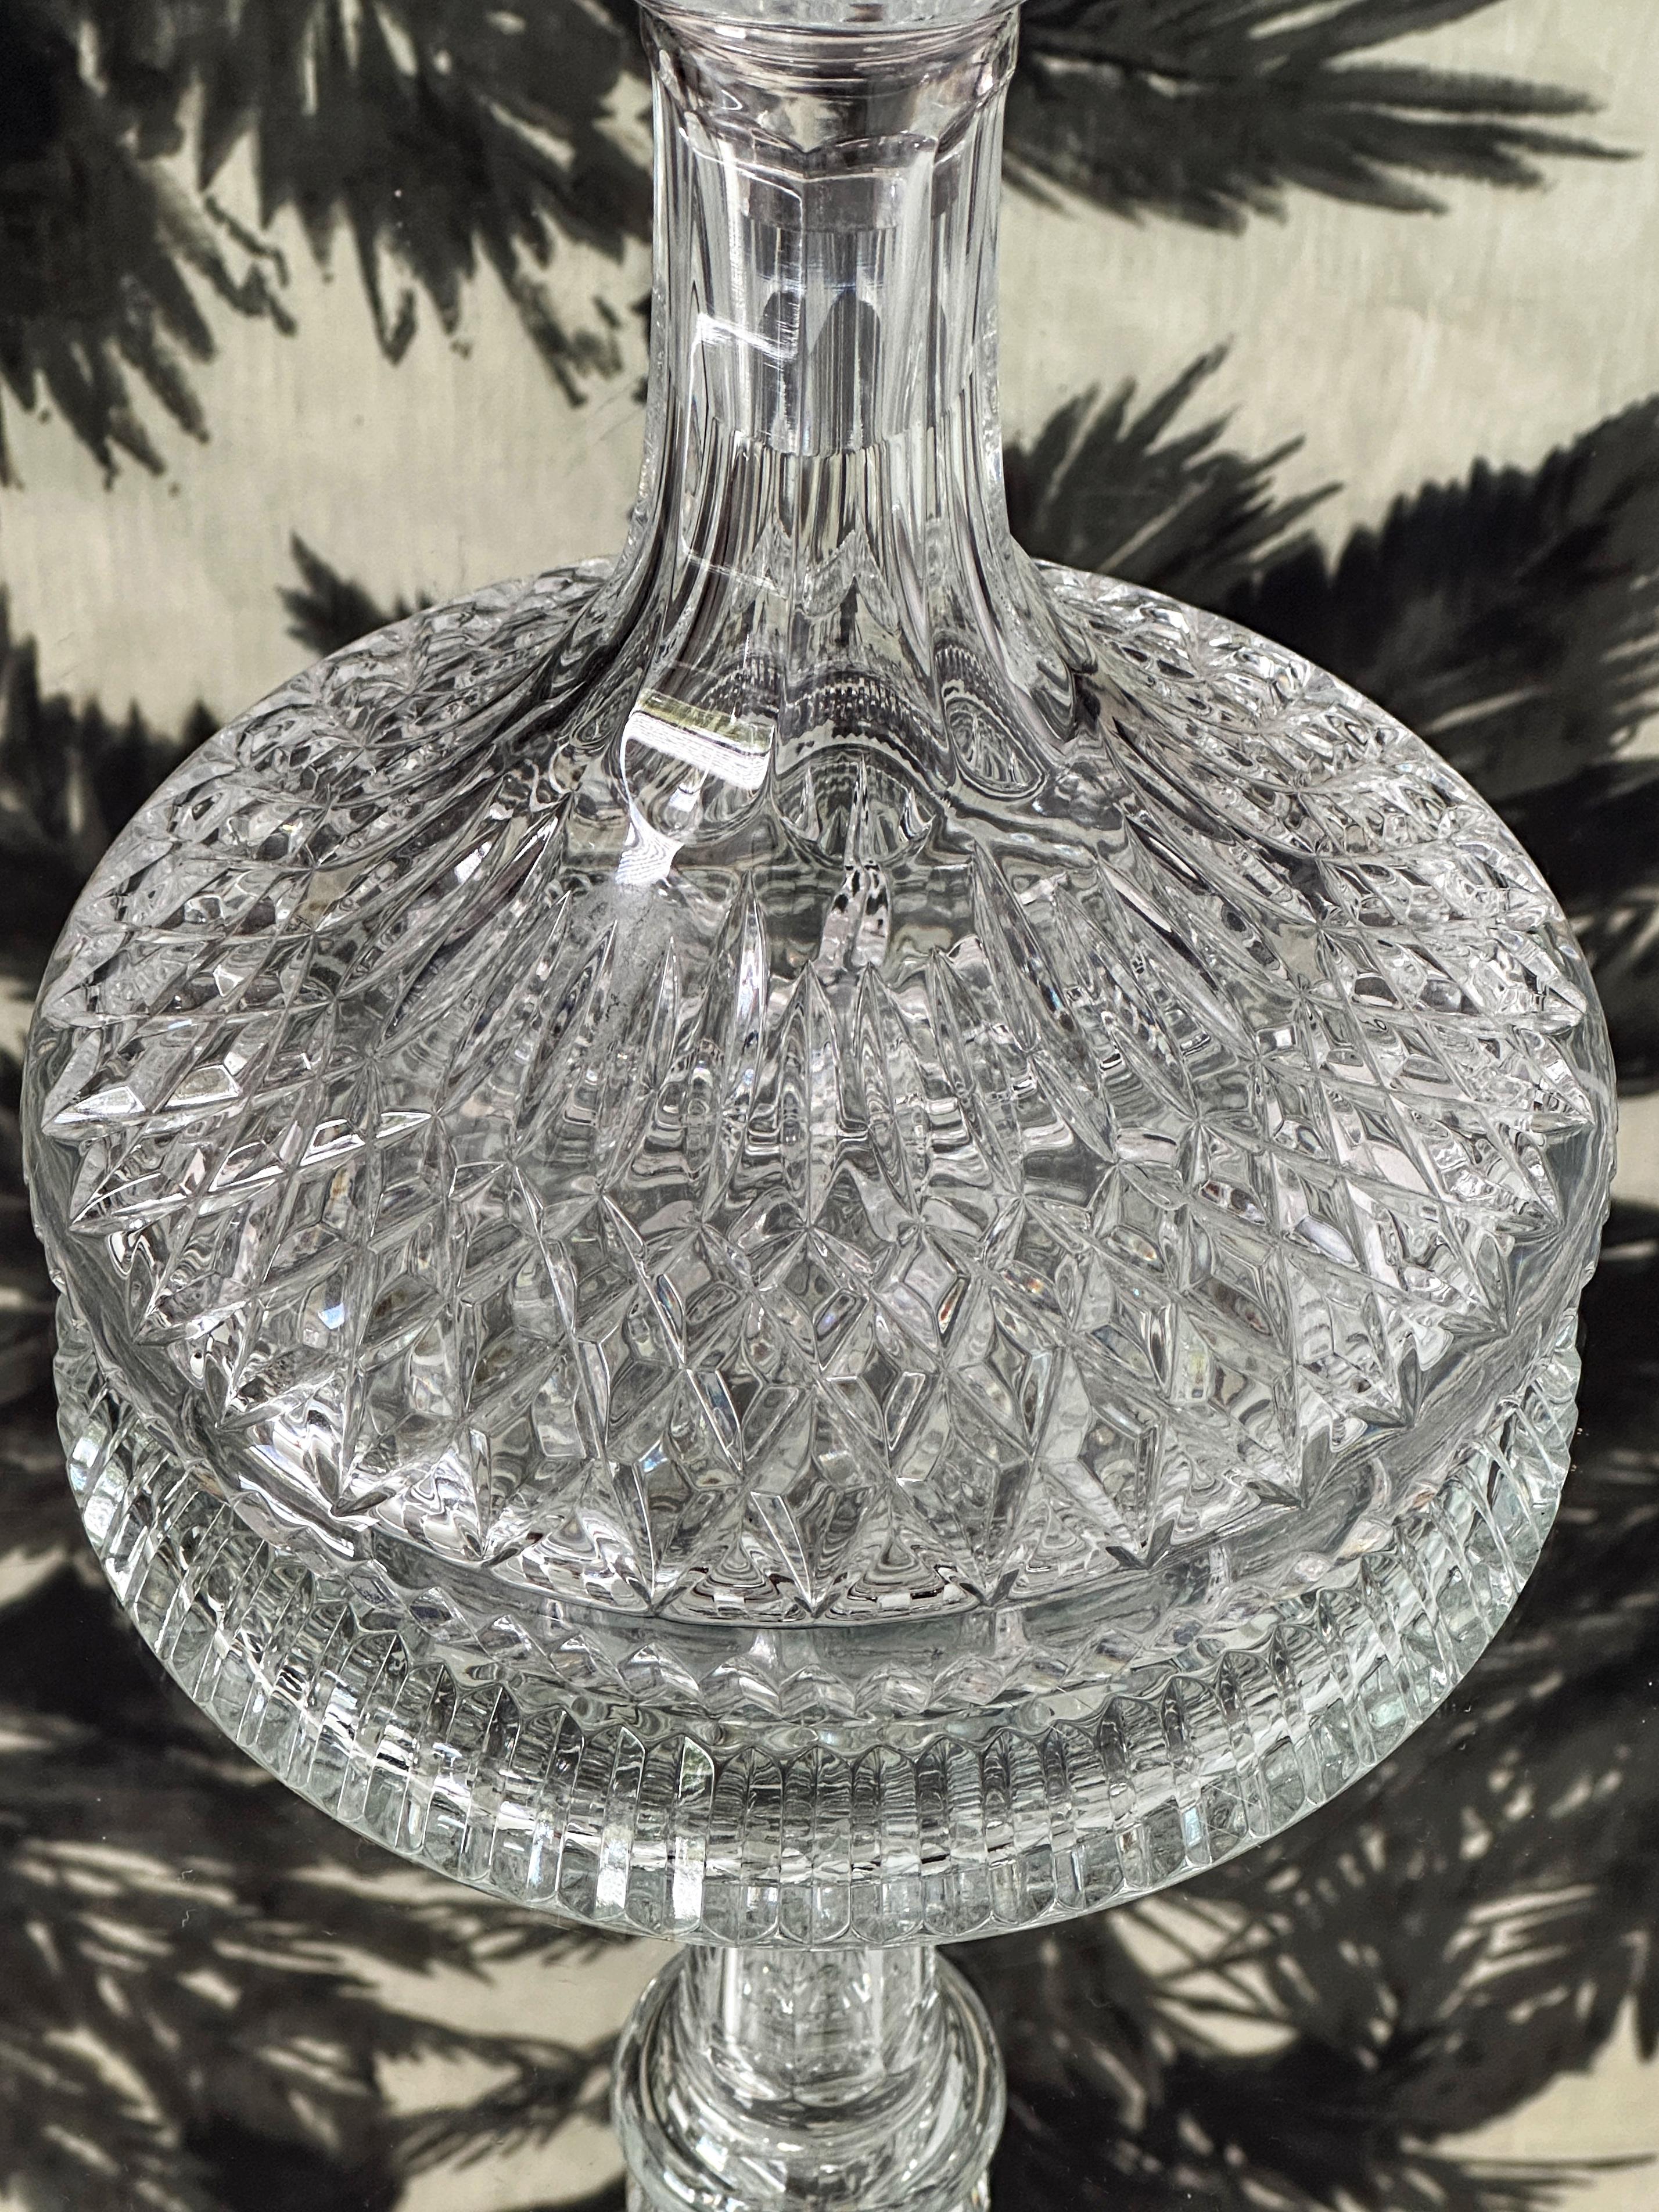 Irish Vintage Waterford Crystal Ships Decanter with Etched Diamond Cuts, c. 1970's